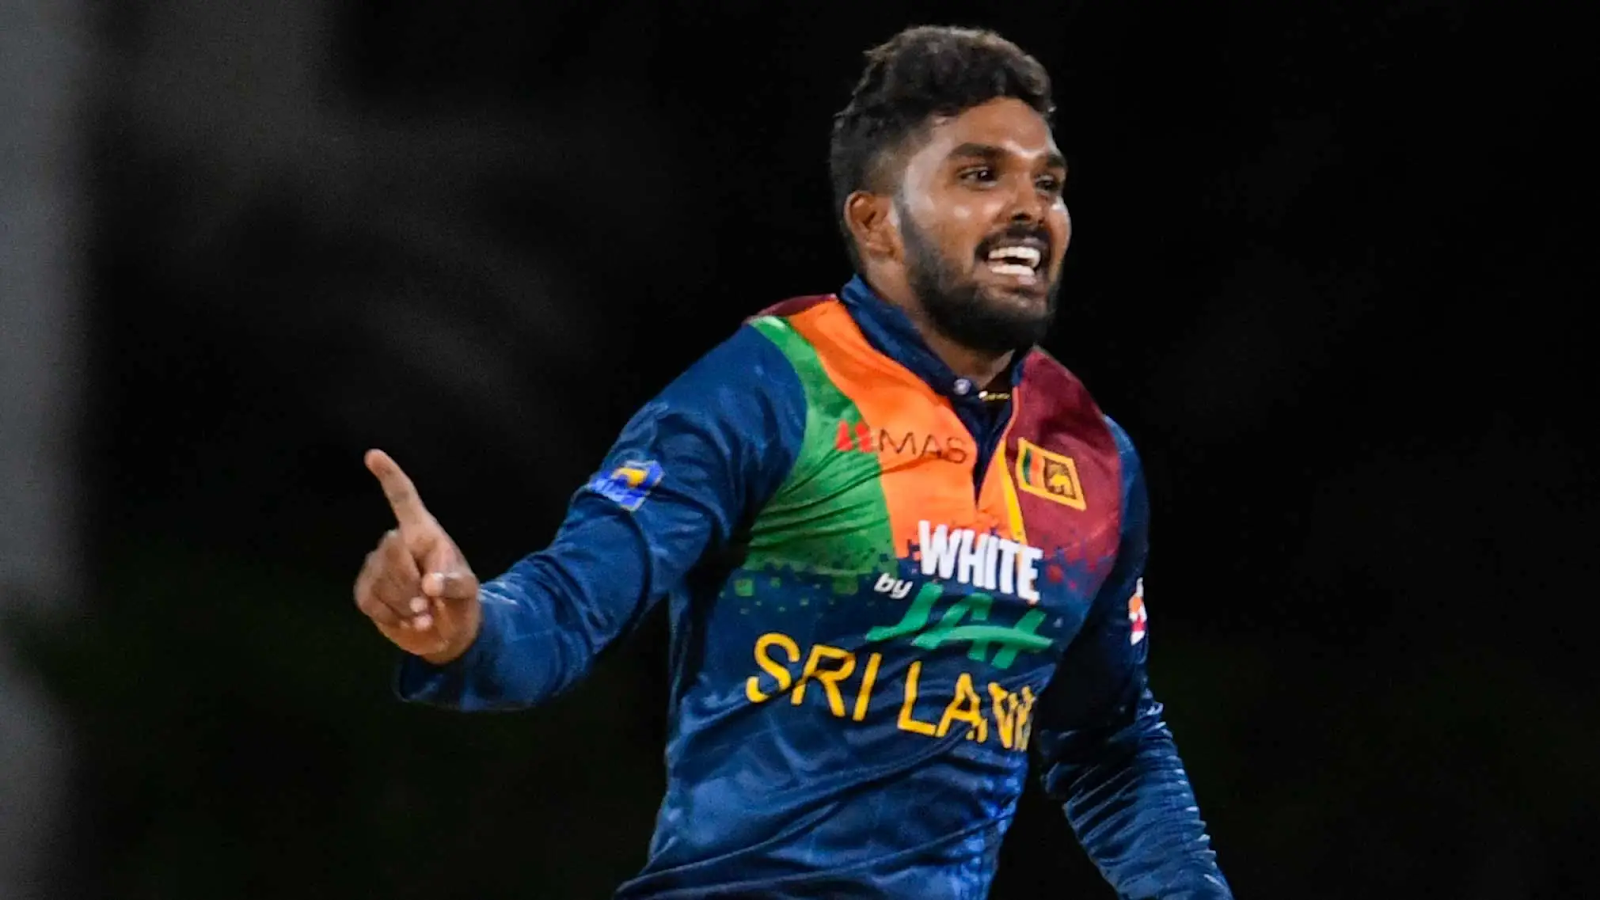 Wanindu Hasaranga is the leading wicket-taker in the ongoing tournament